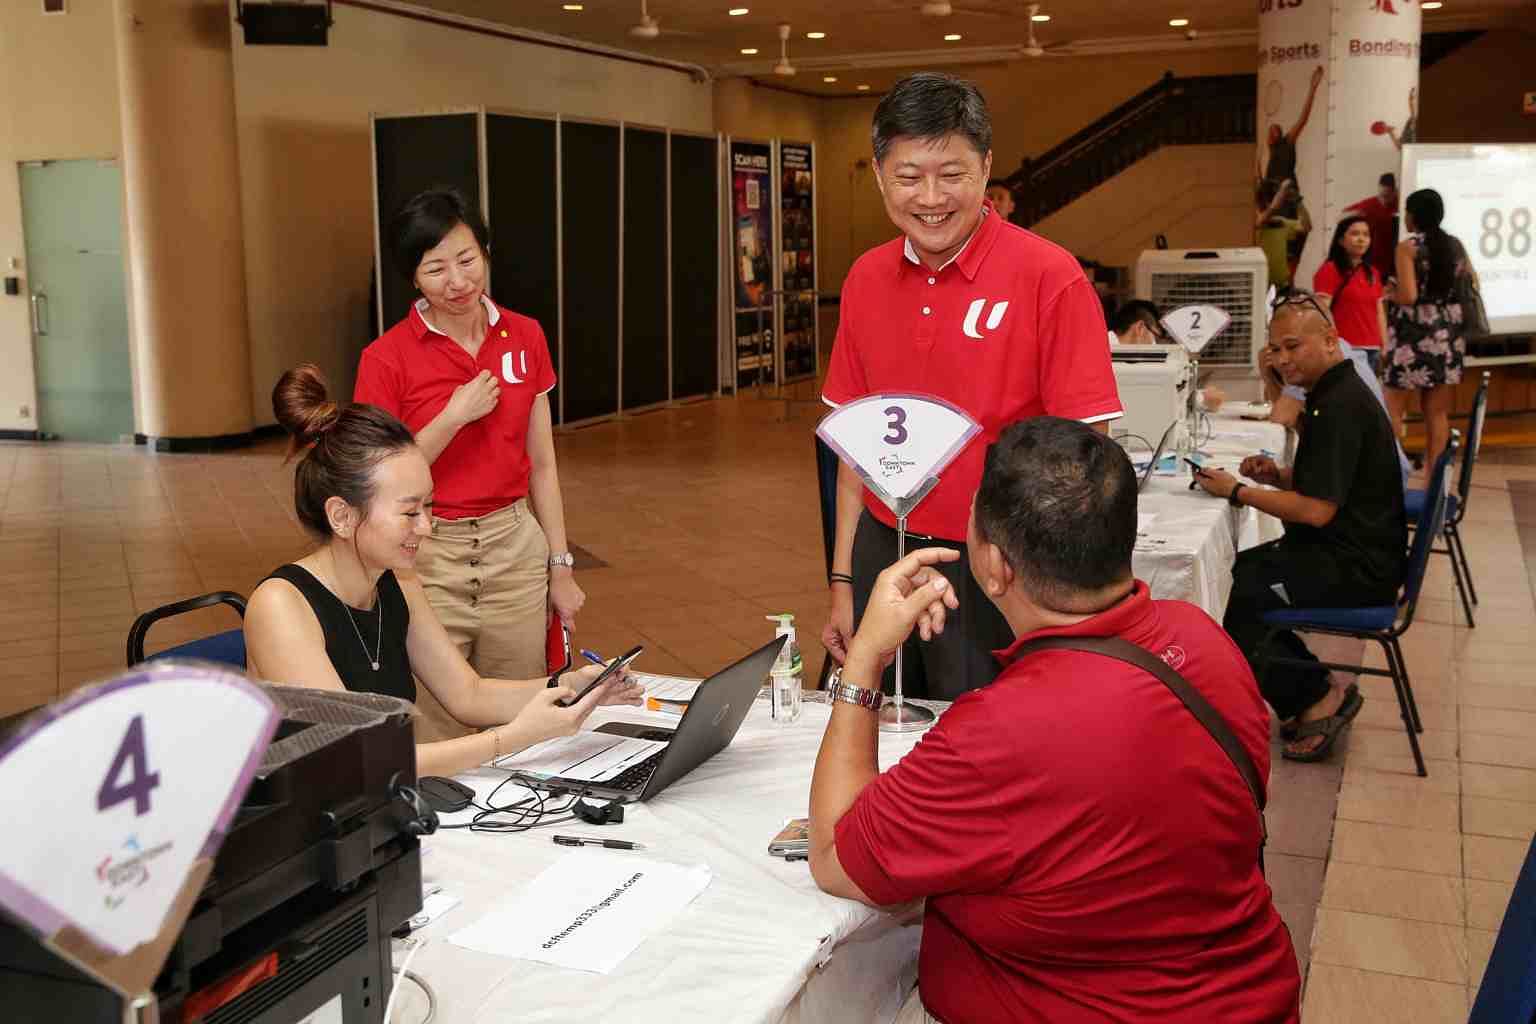 Care centre for private-hire, taxi drivers affected by coronavirus outbreak  launched at Downtown East, Transport News & Top Stories - The Straits Times